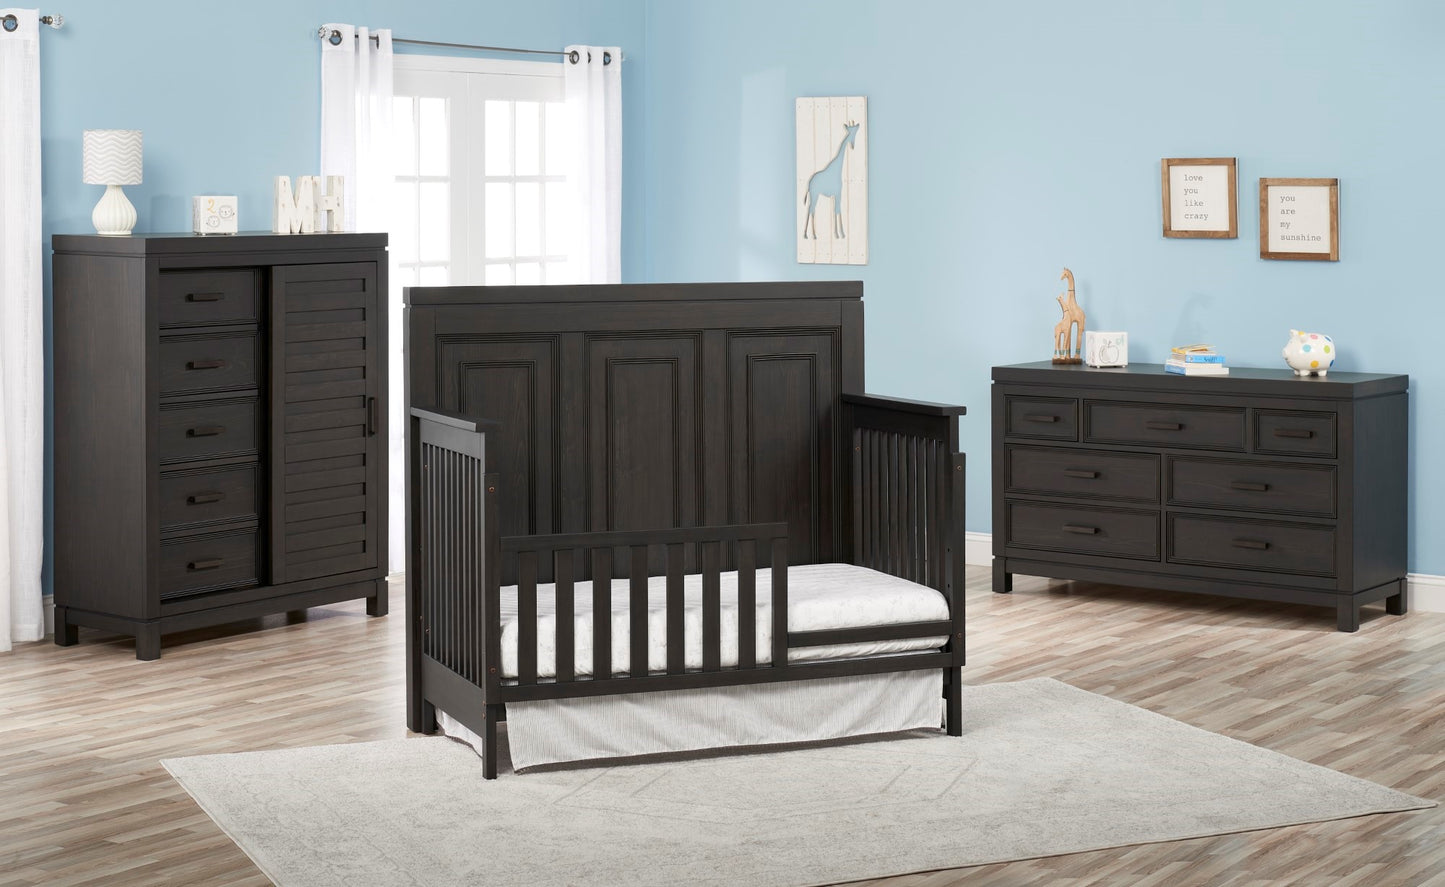 Manchester 4 in 1 Convertible Crib